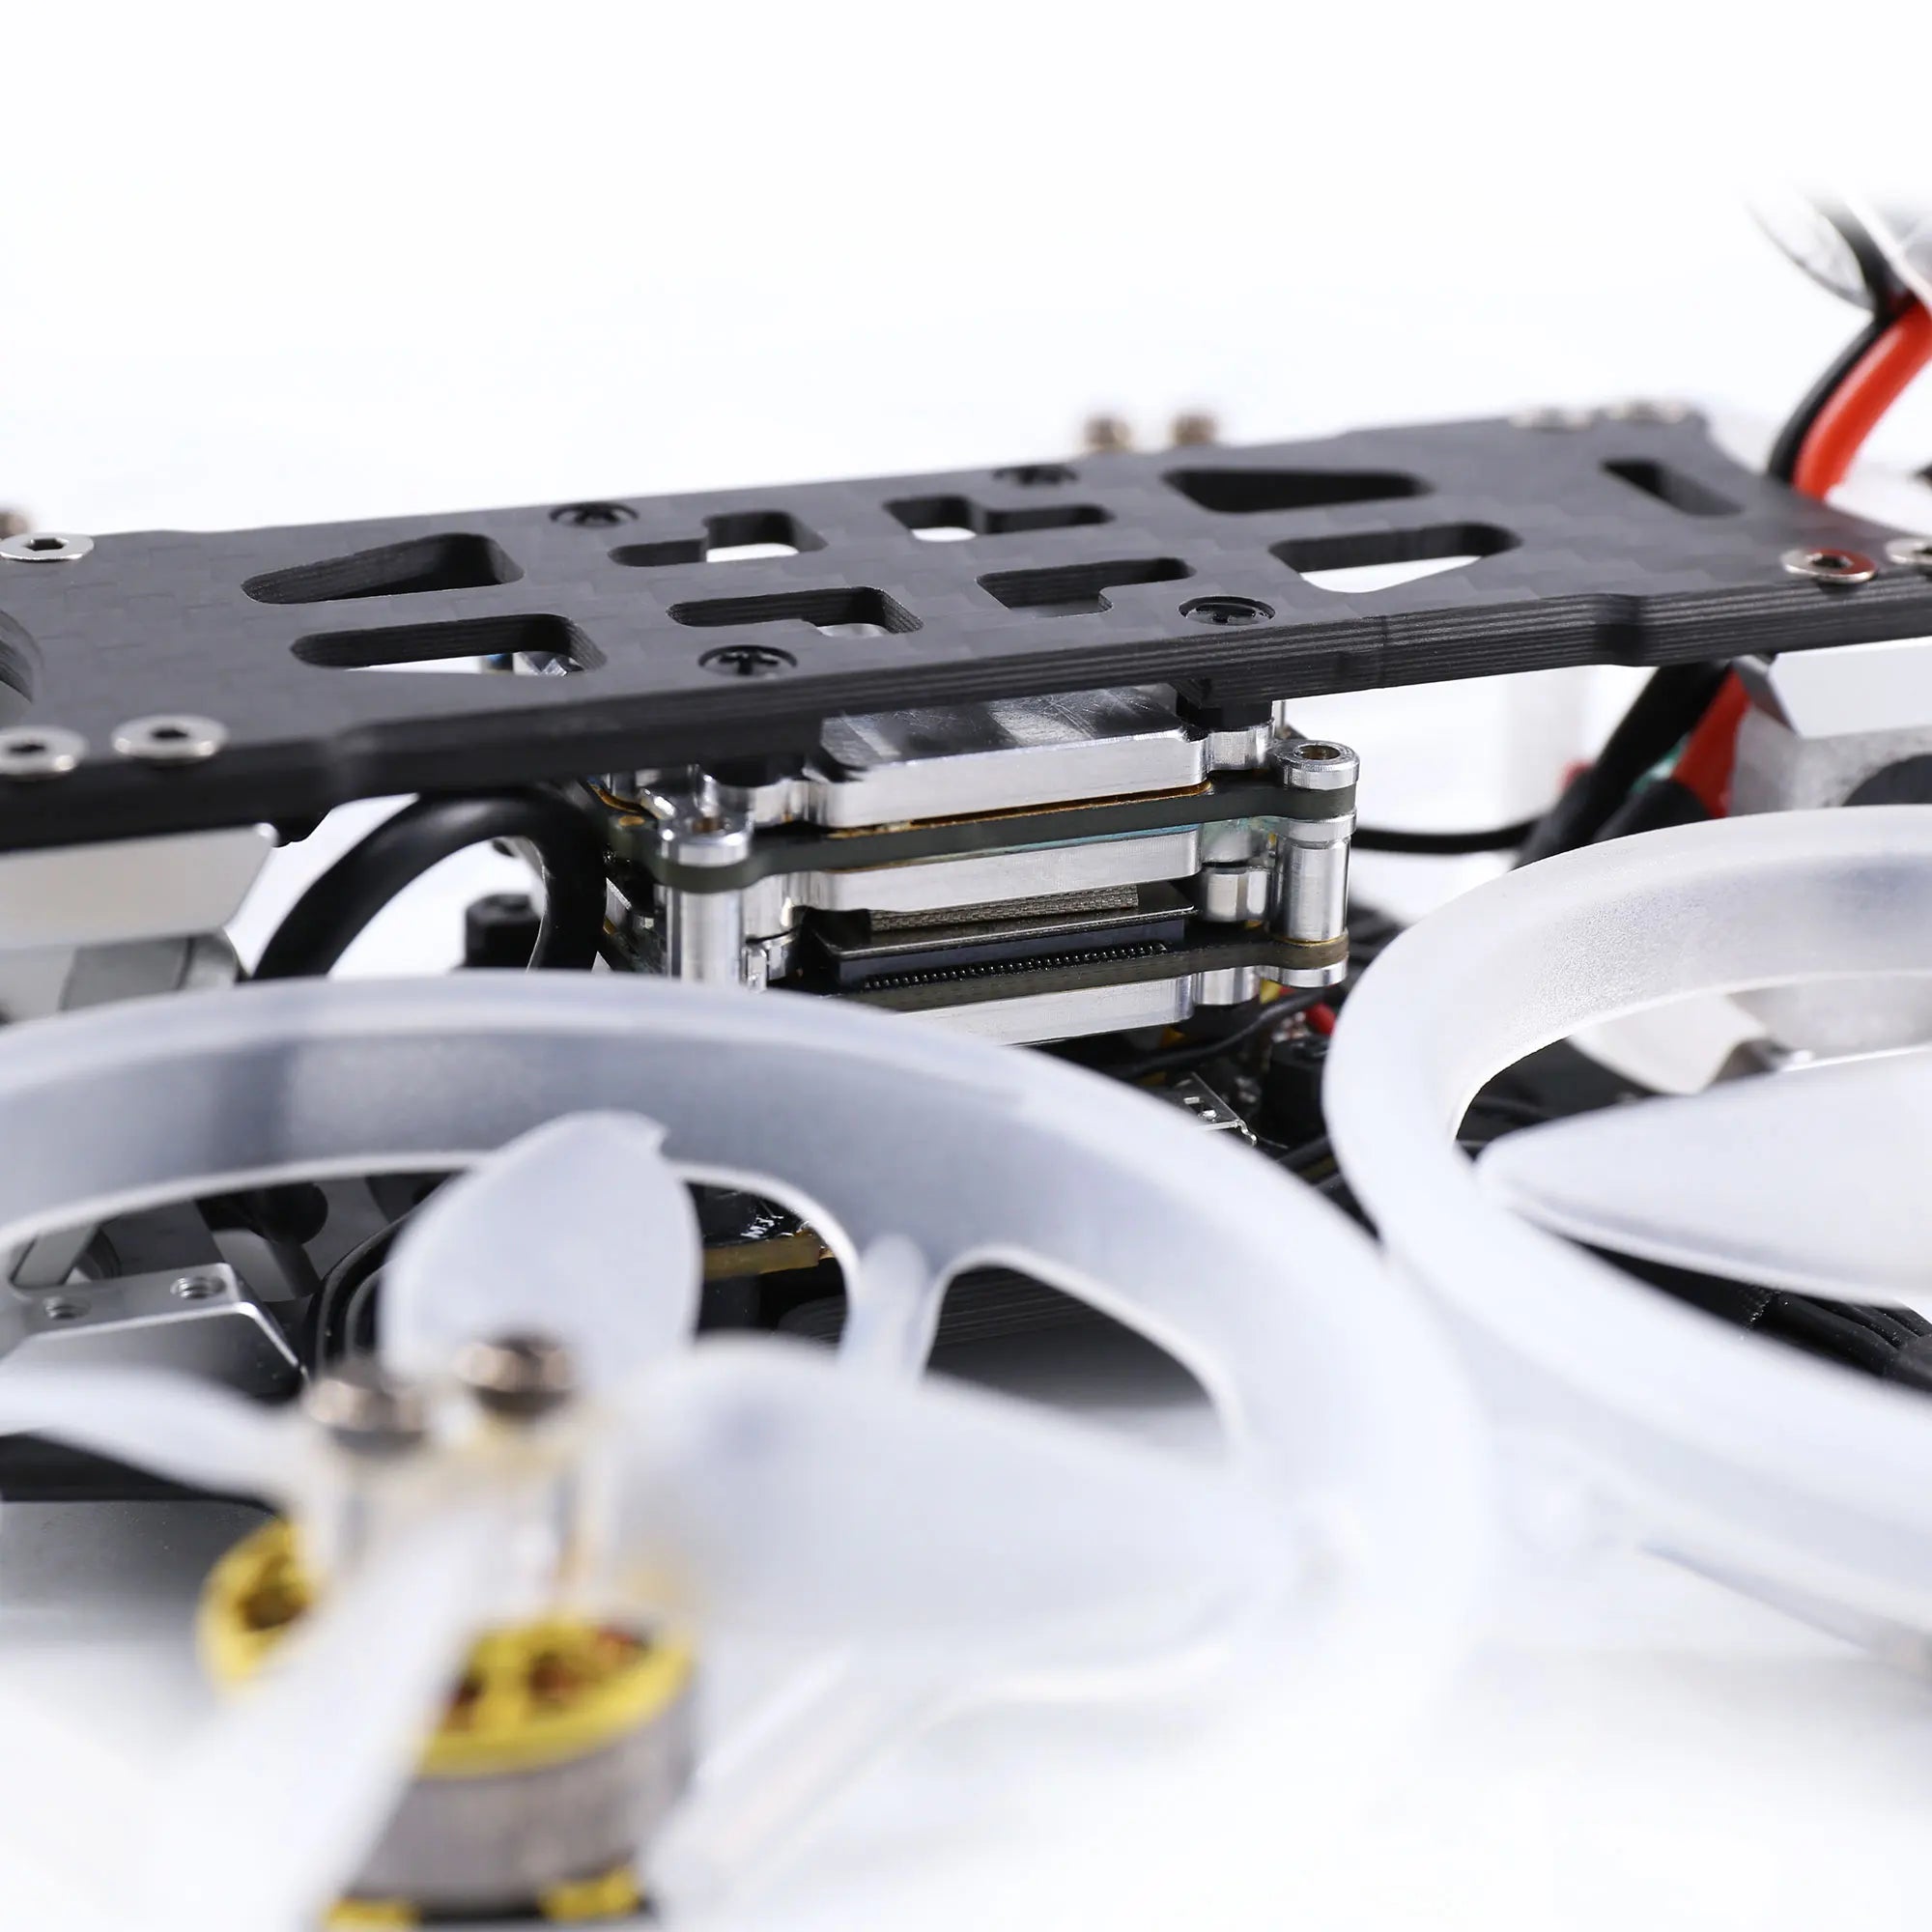 GEPRC ROCKET FPV Drone, the electronic system and power system use the latest AIO integrated board GEP-20A-F